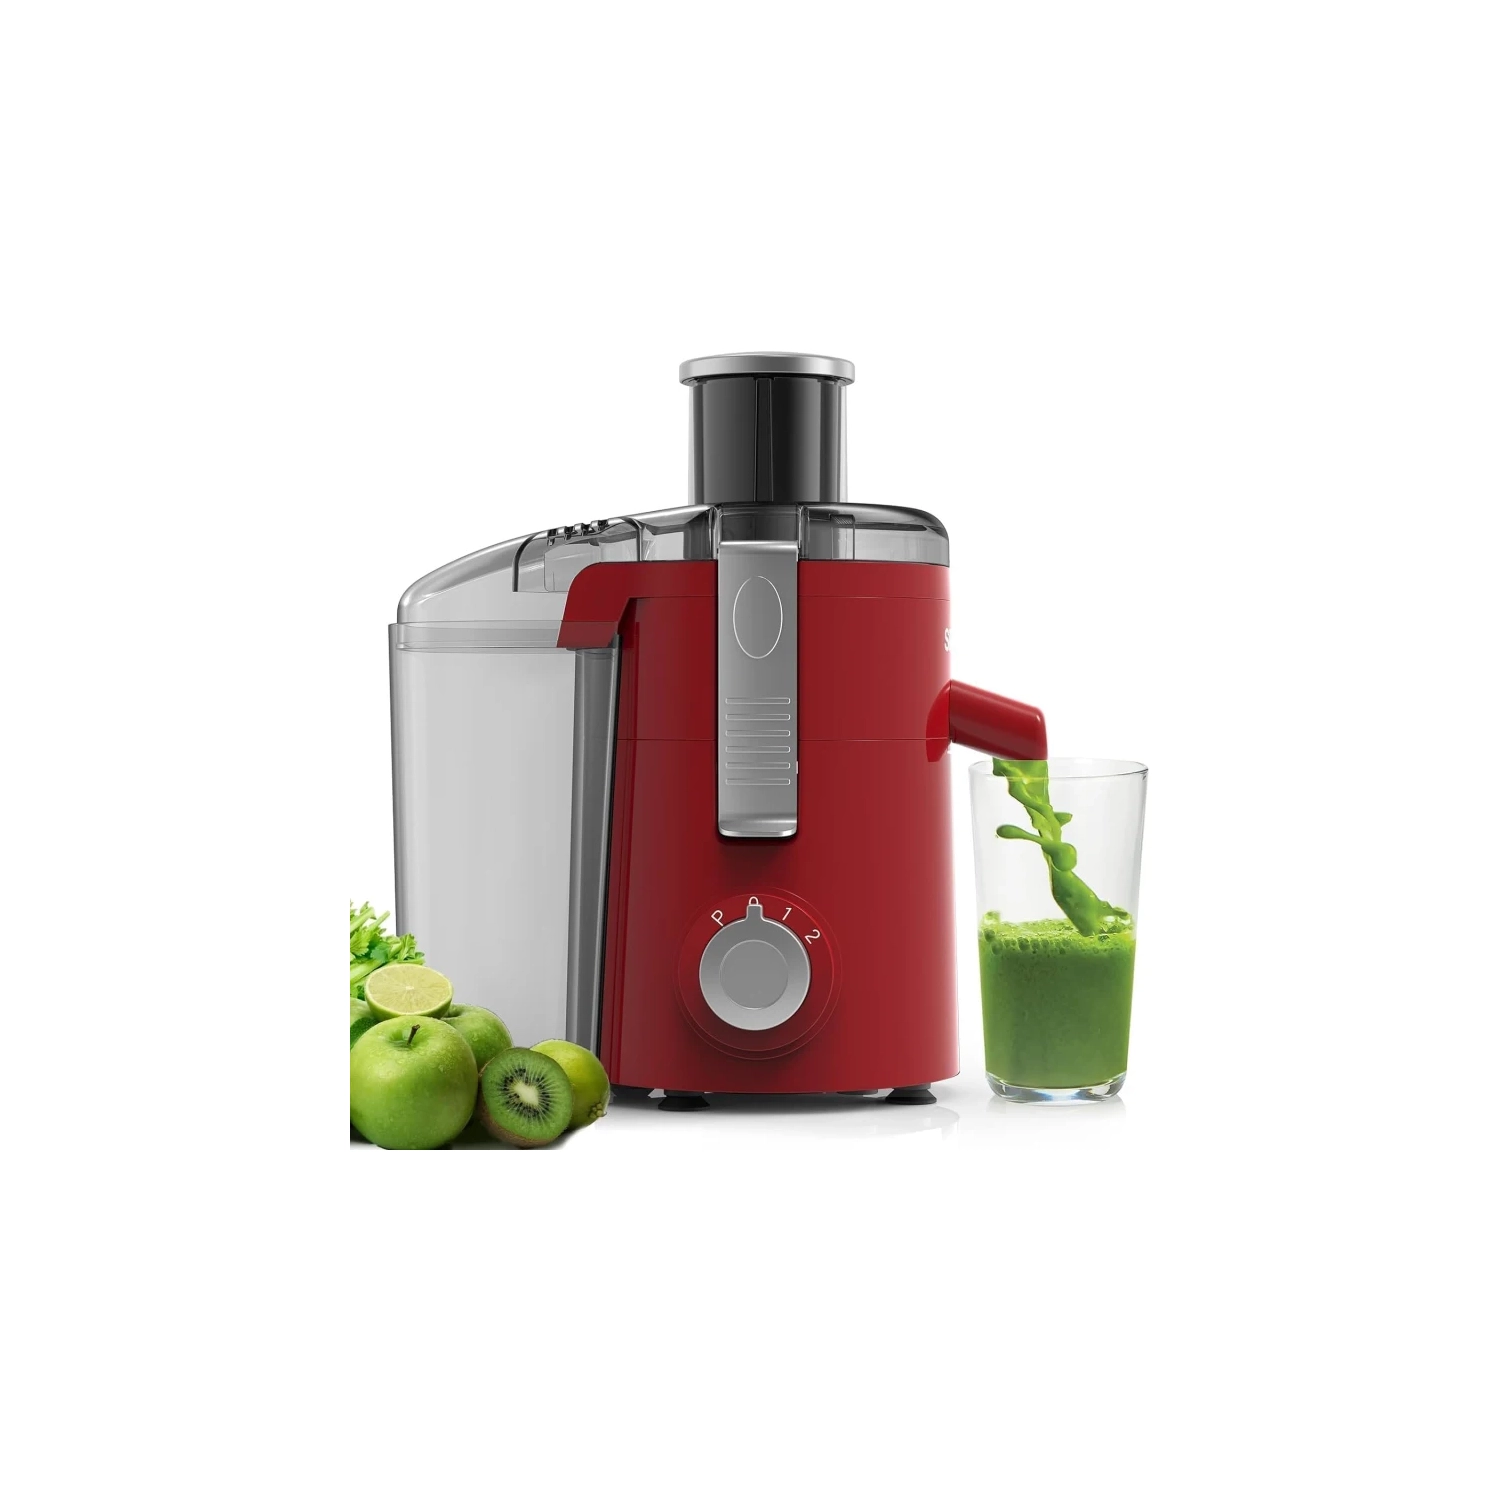 High-Speed Juice Extractor | 2.5" Large Feed Chute | 3-Speed Control | Cold Press Technology | Easy Clean | BPA-Free | Compact Design - Red